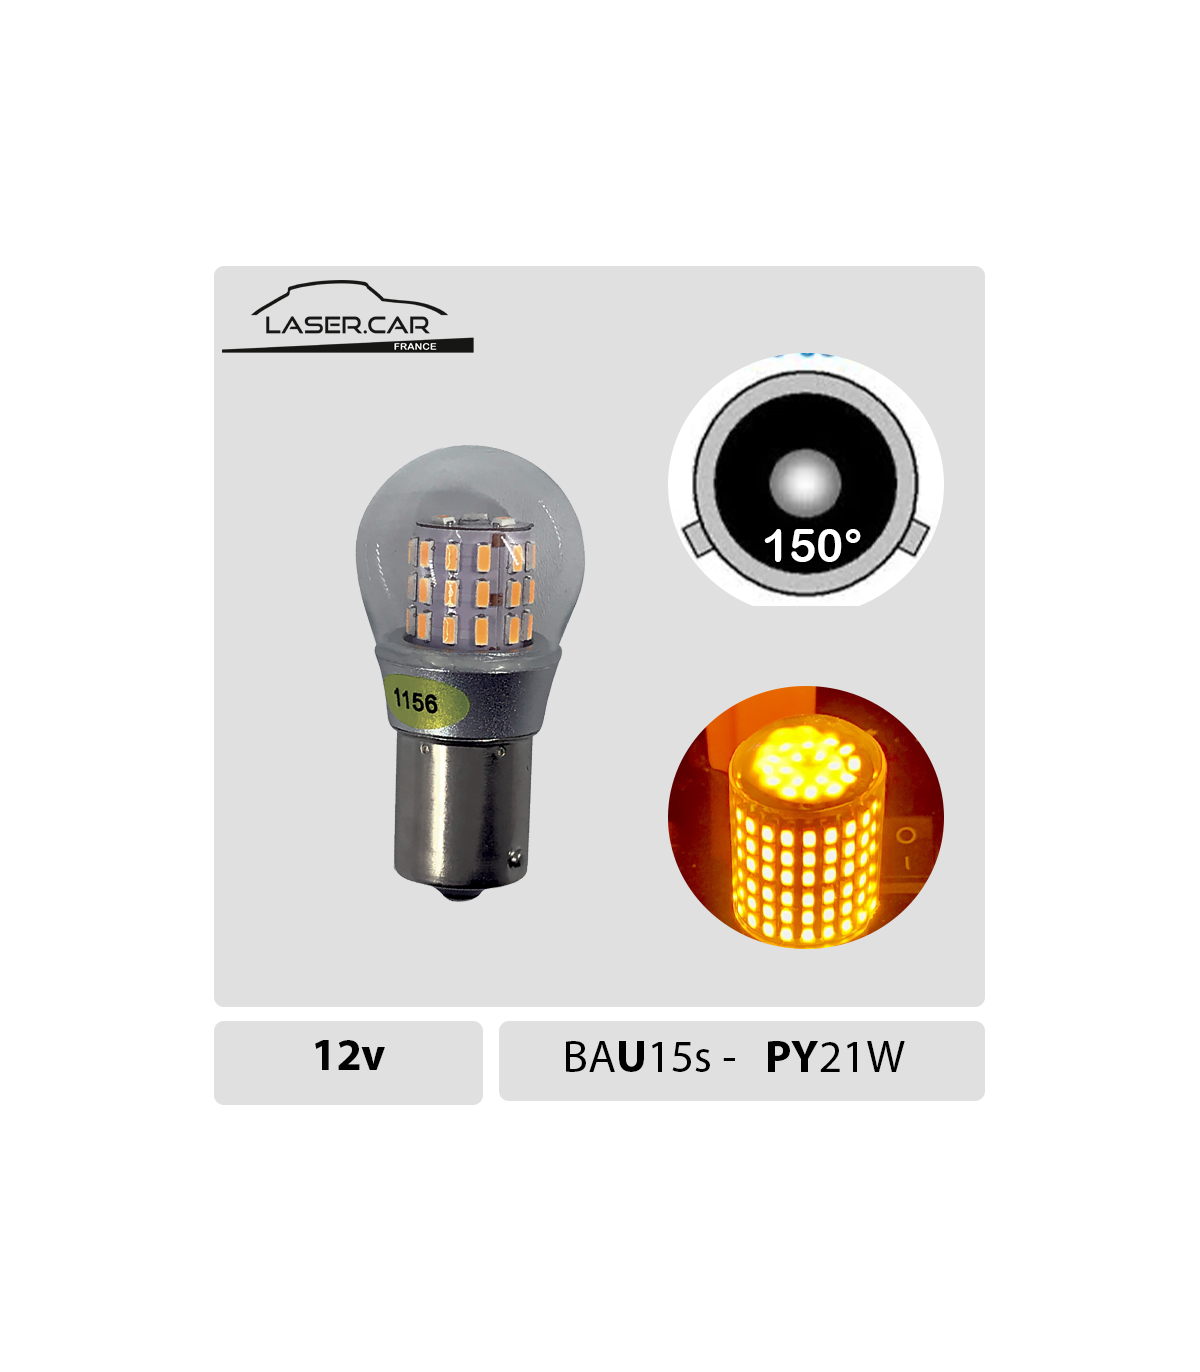 Ampoules led voiture ancienne - Matthys